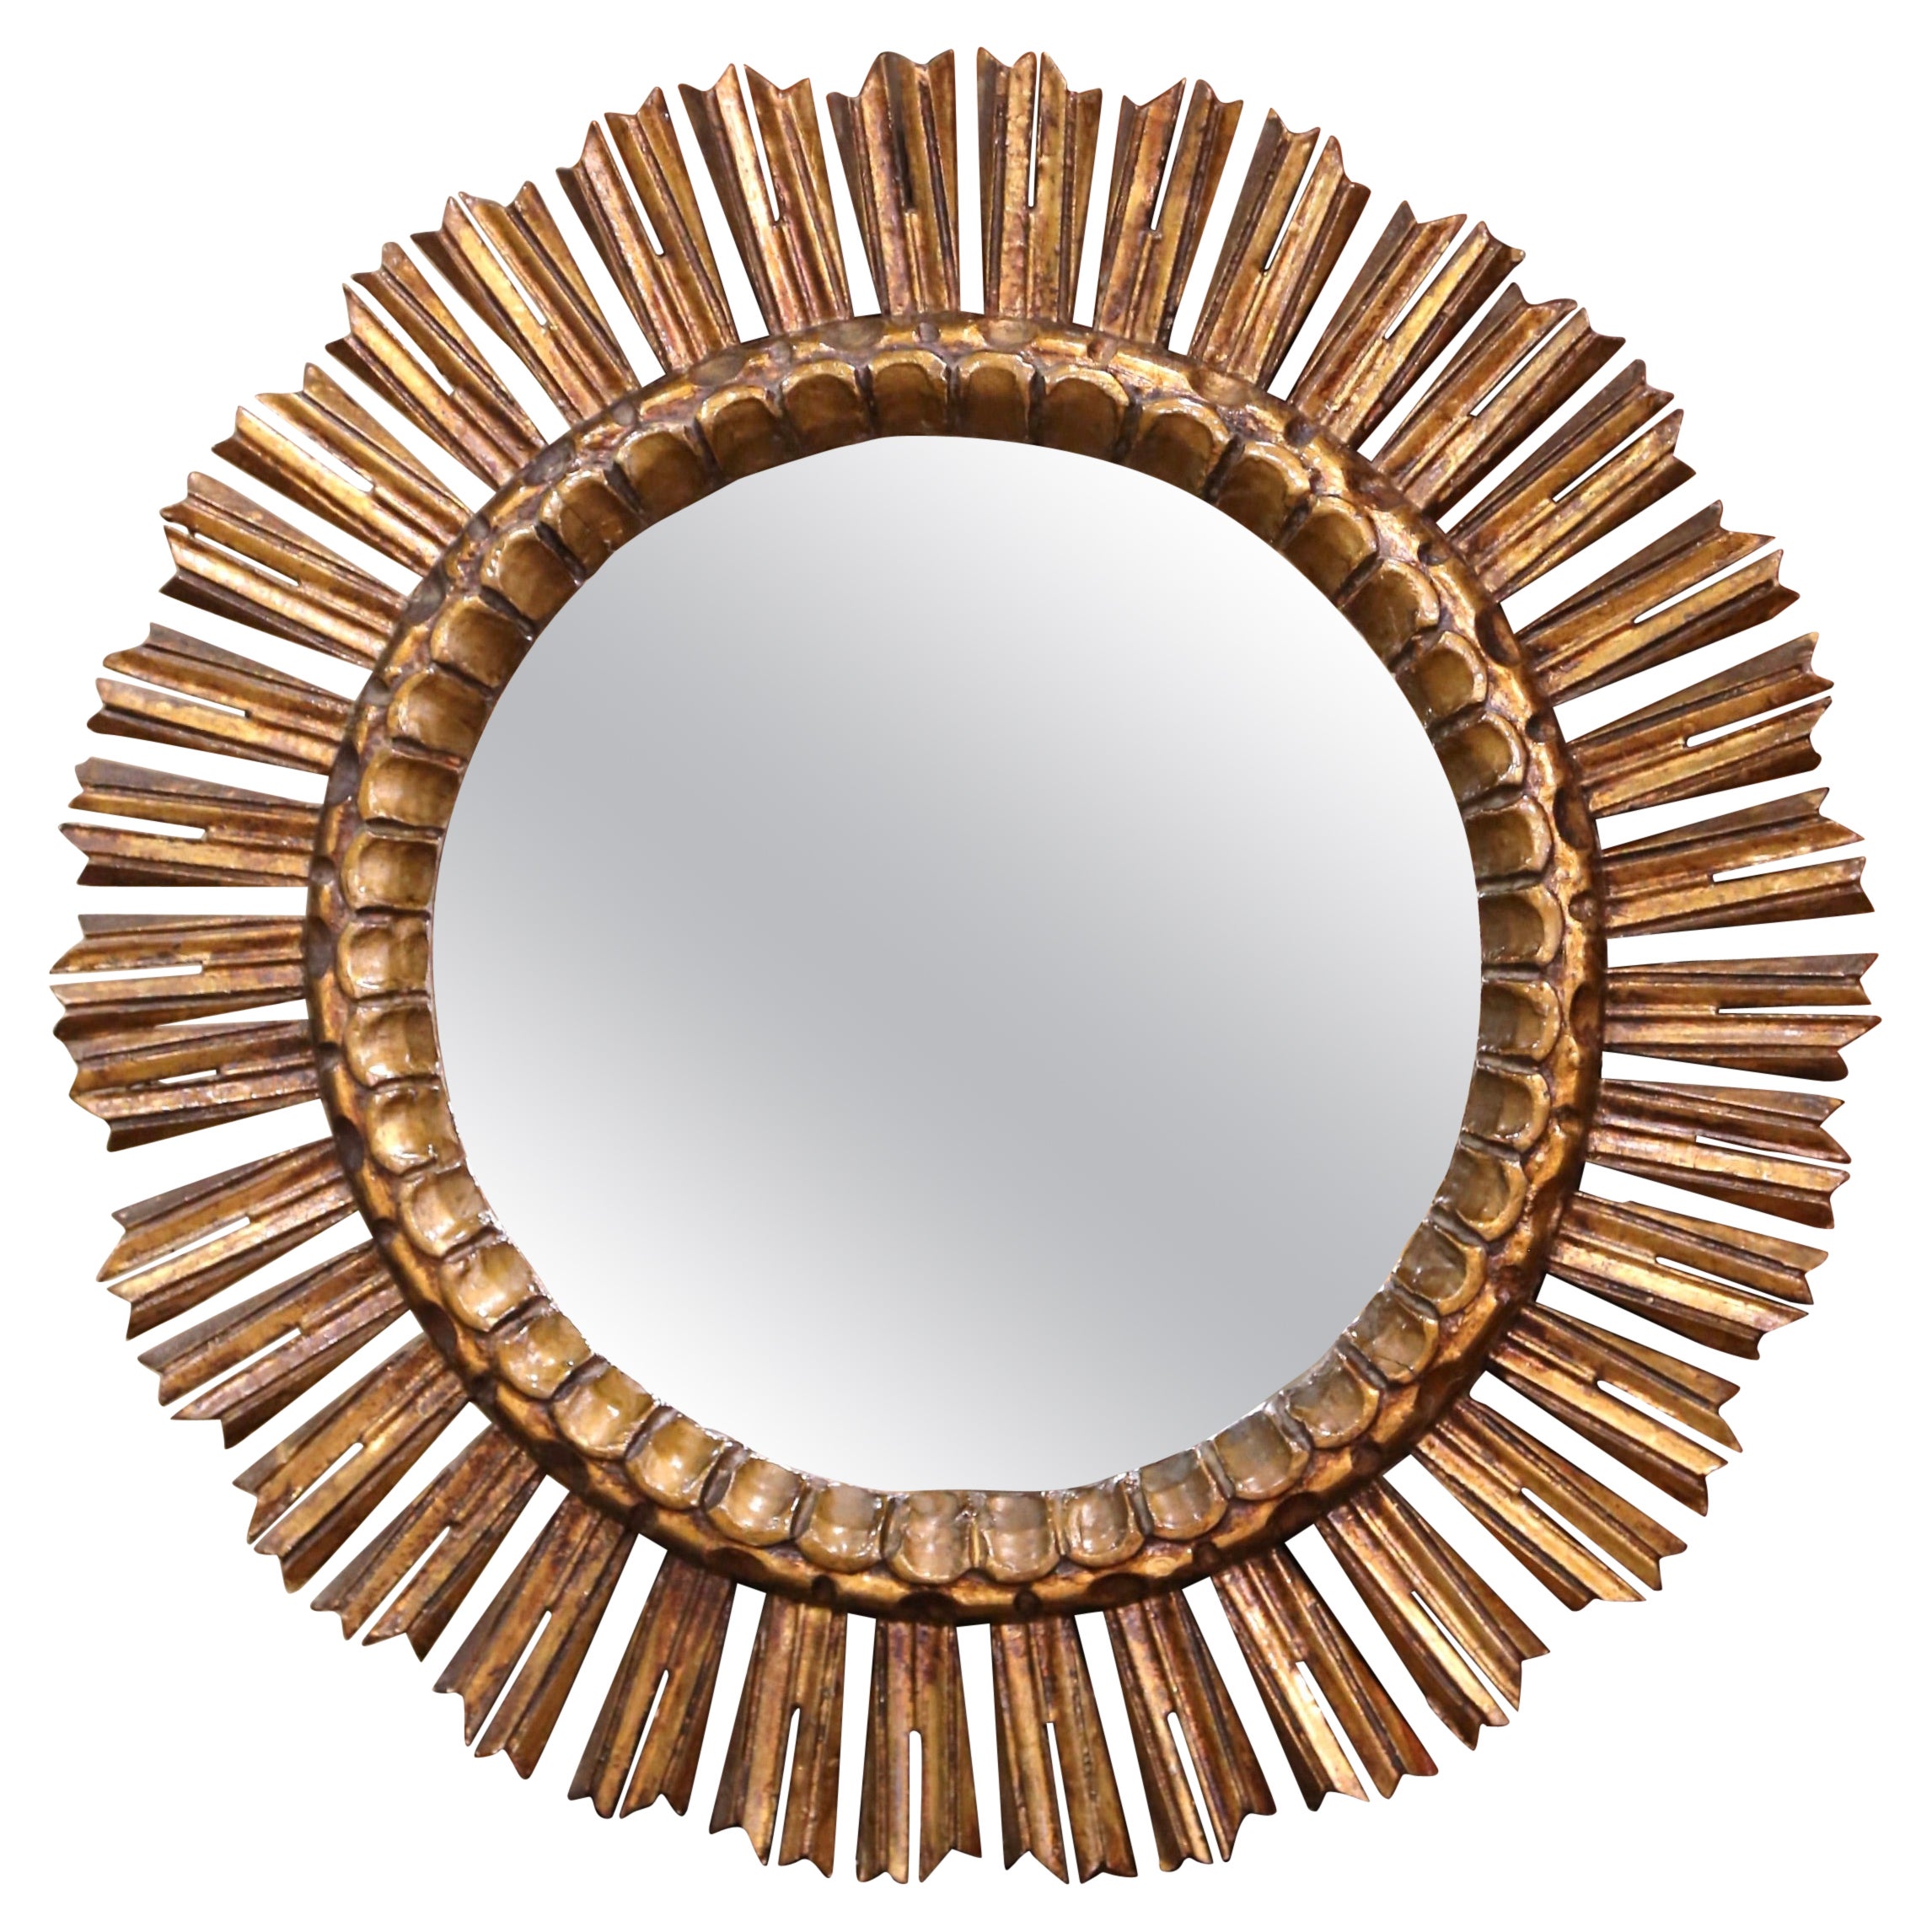  Early 20th Century French Carved Giltwood Sunburst Mirror For Sale